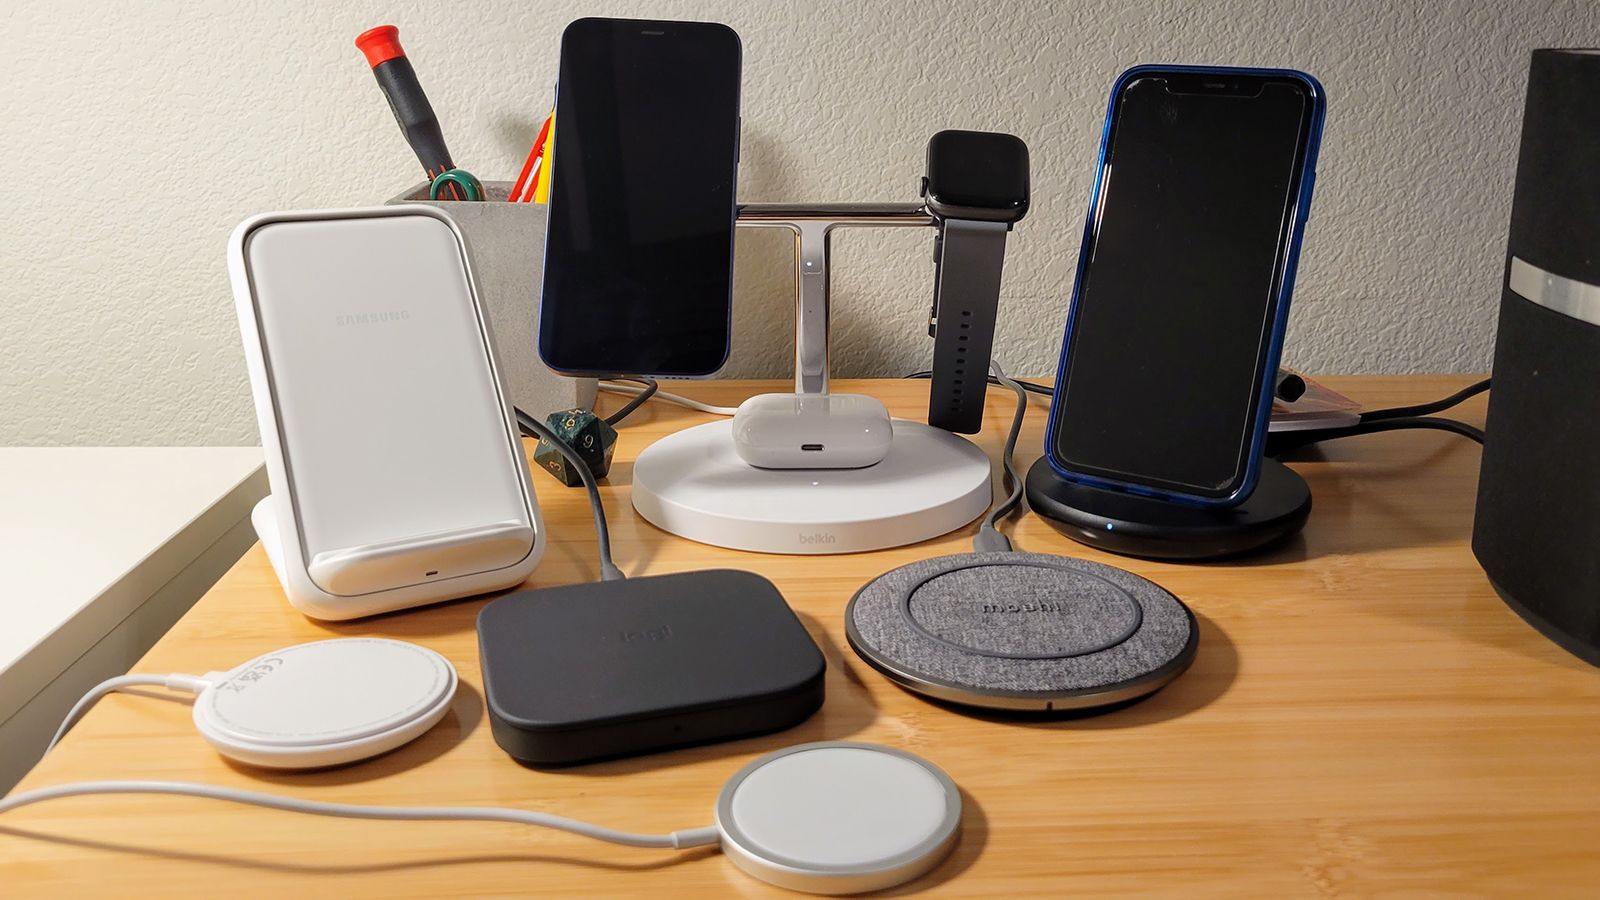 get-the-multi-device-wireless-charger-for-under-40-and-keep-your-devices-powered-up-on-the-go